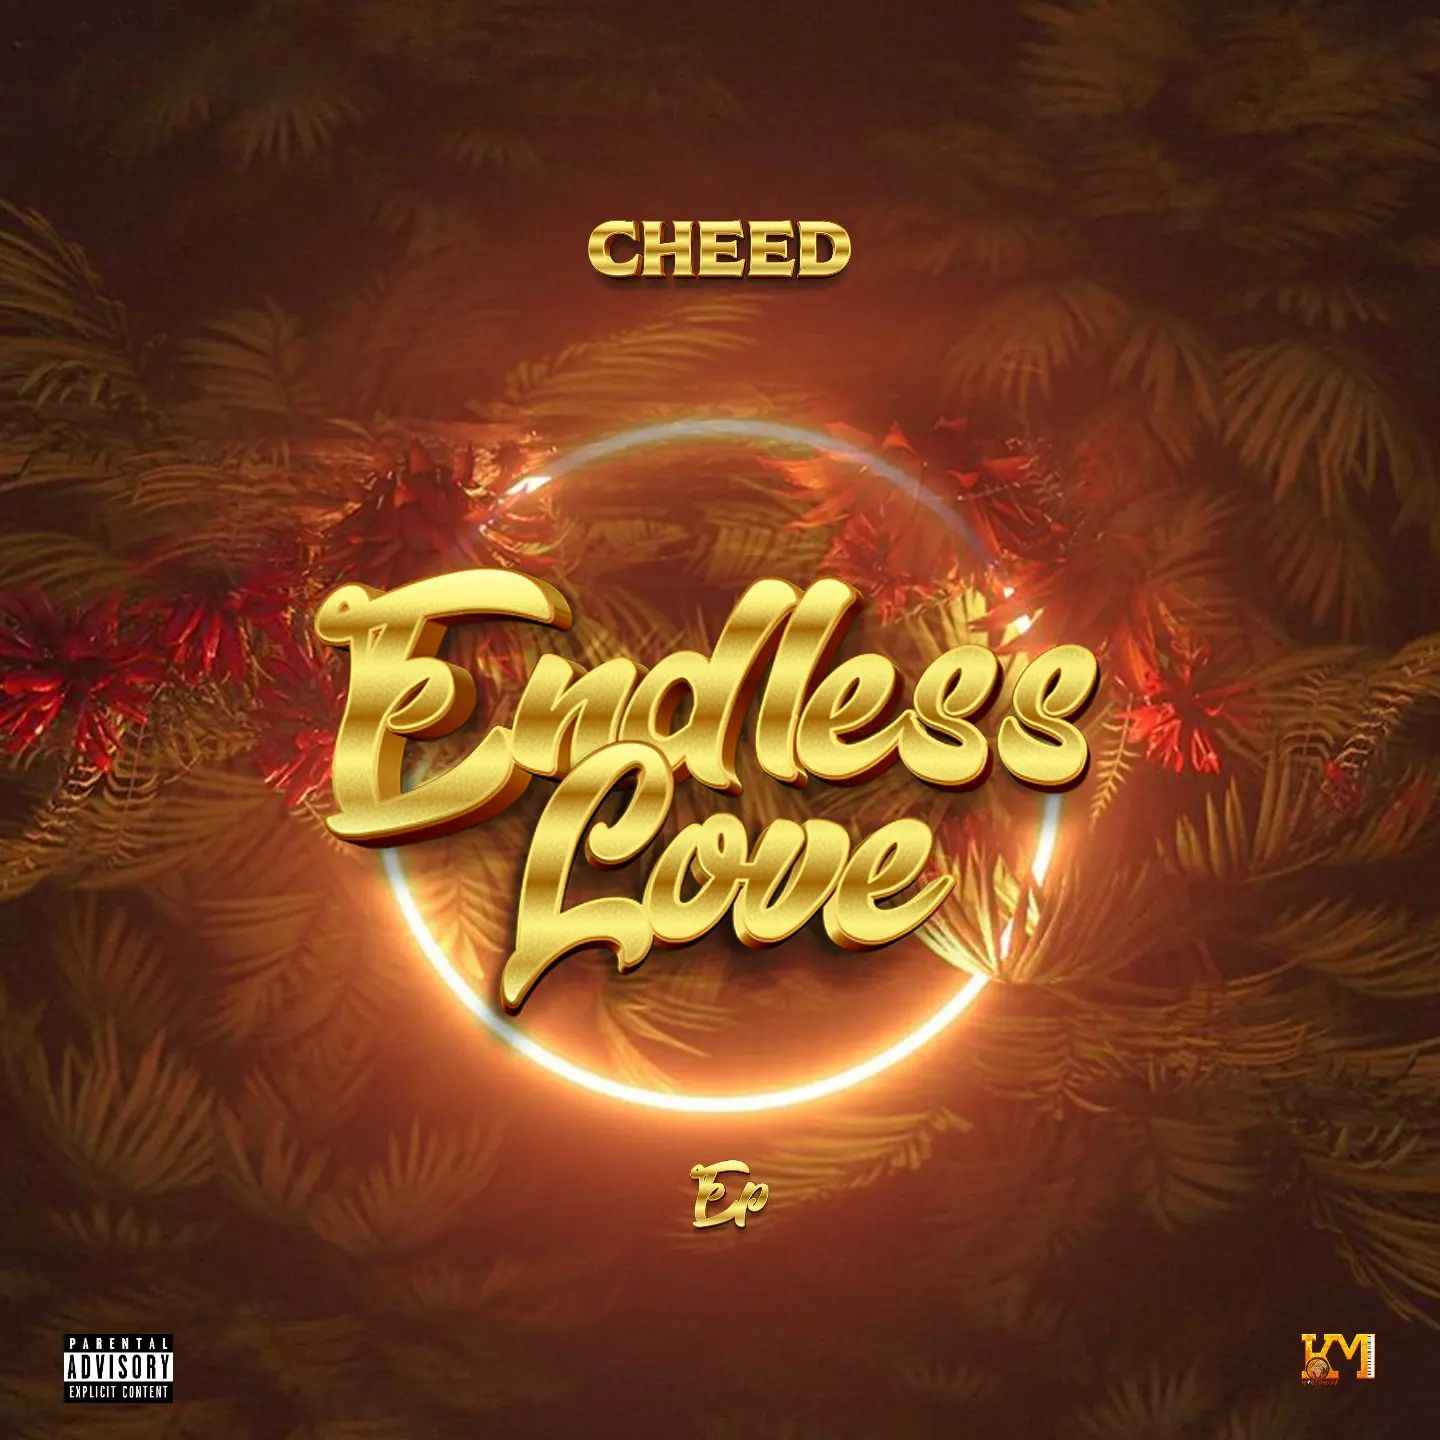 Cheed - Endless Love EP Album Download